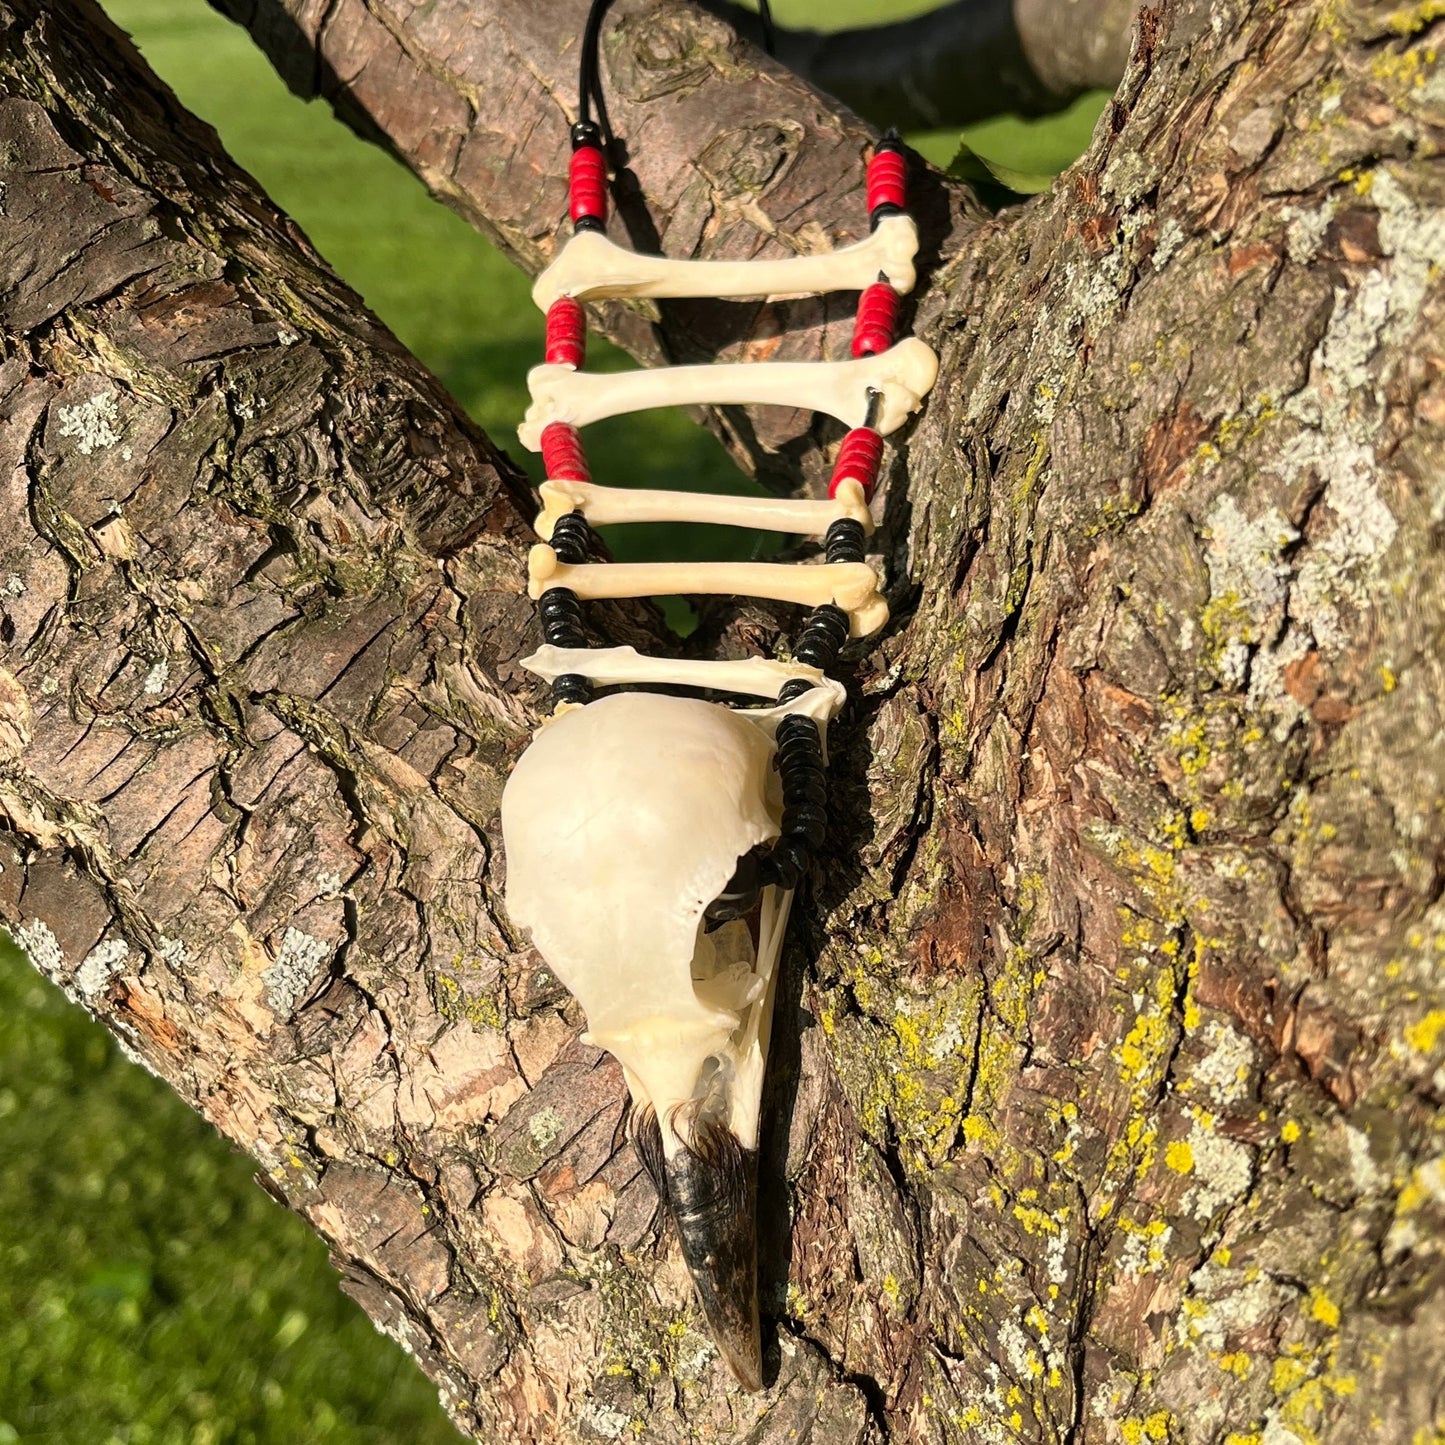 The Long Crow Necklace